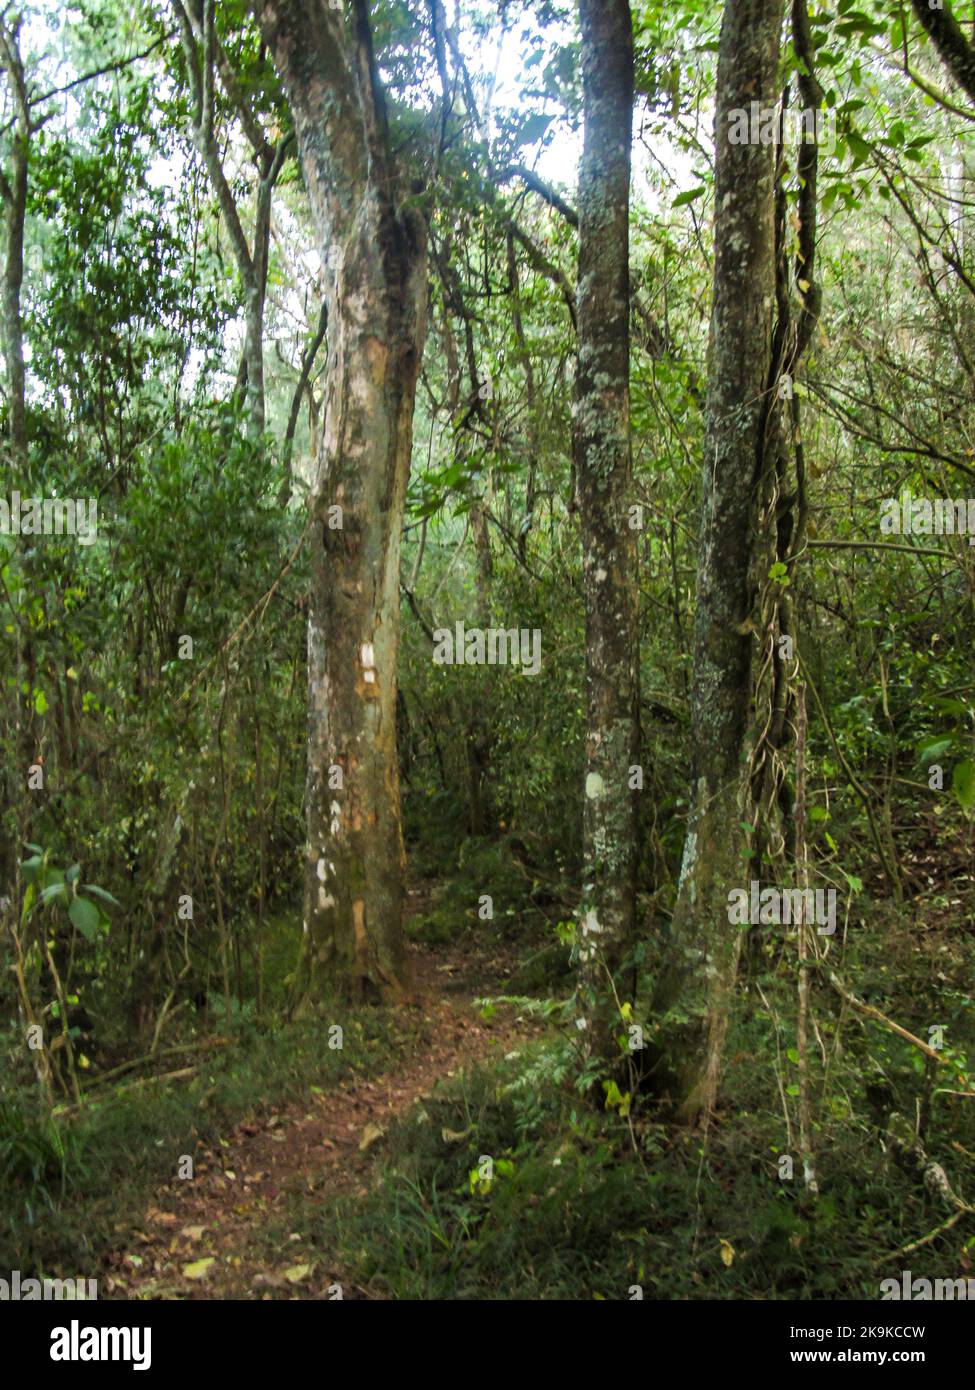 A small hiking trail, Winding through the indigenous Afromontane Forest of Kaapsche hoop, South Africa. Stock Photo